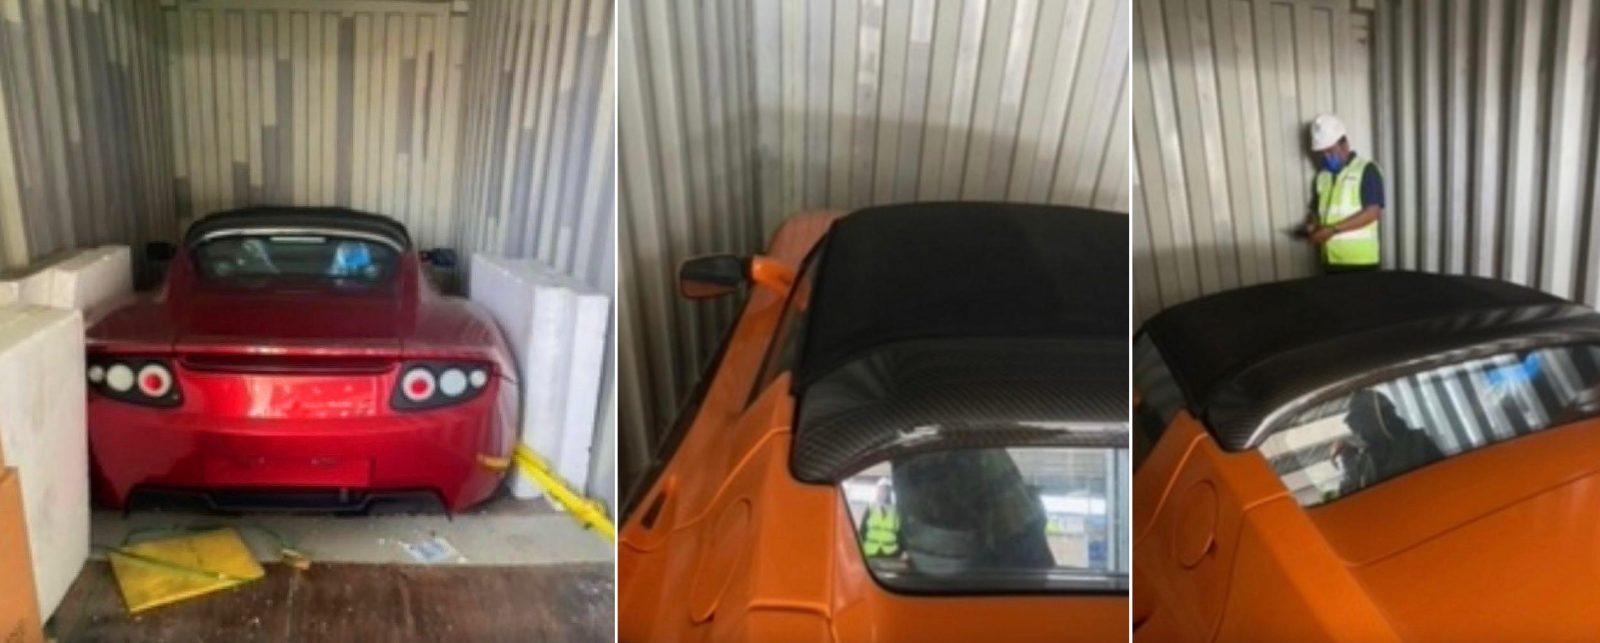 Tesla roadster shipping container